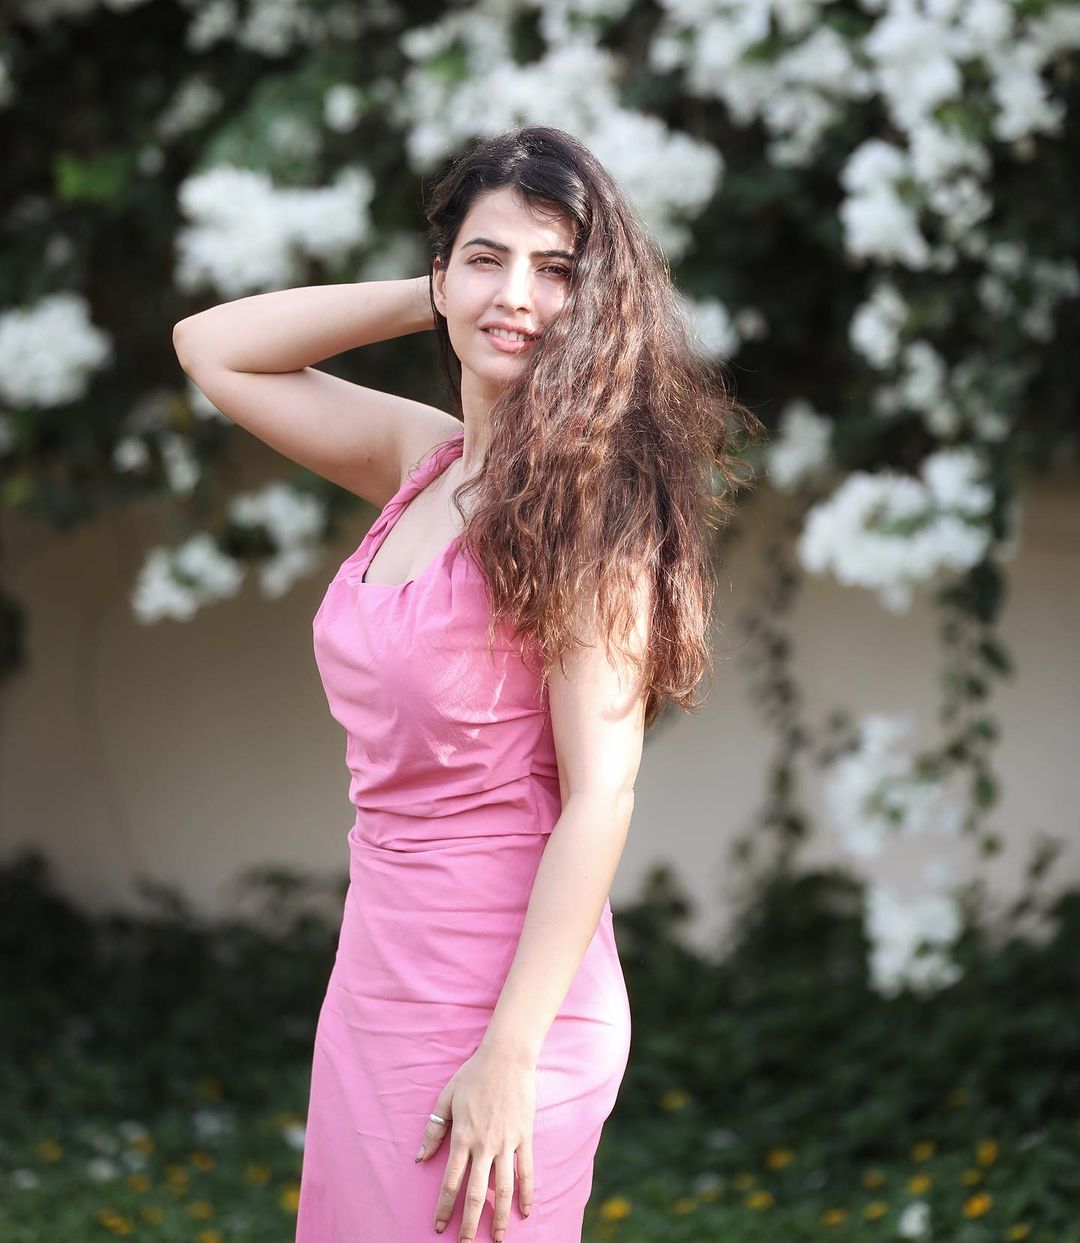 Beautiful Actress Smriti Kalra Shares About Solo Travelling! She Says Travelling To Unfamiliar Places Make Me Feel More Independent. 